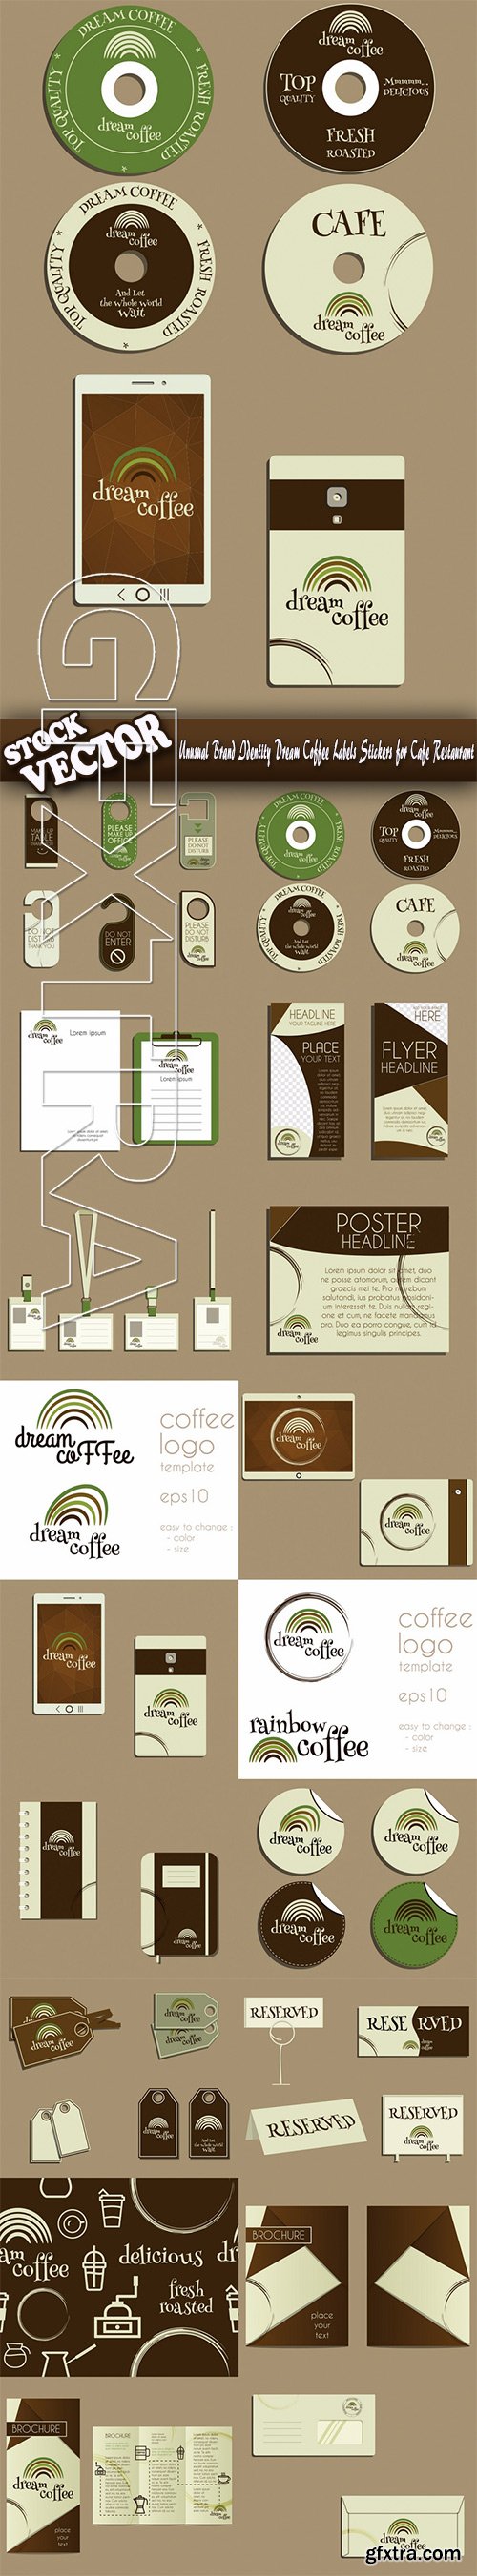 Stock Vector - Unusual Brand Identity Dream Coffee Labels Stickers for Cafe Restaurant